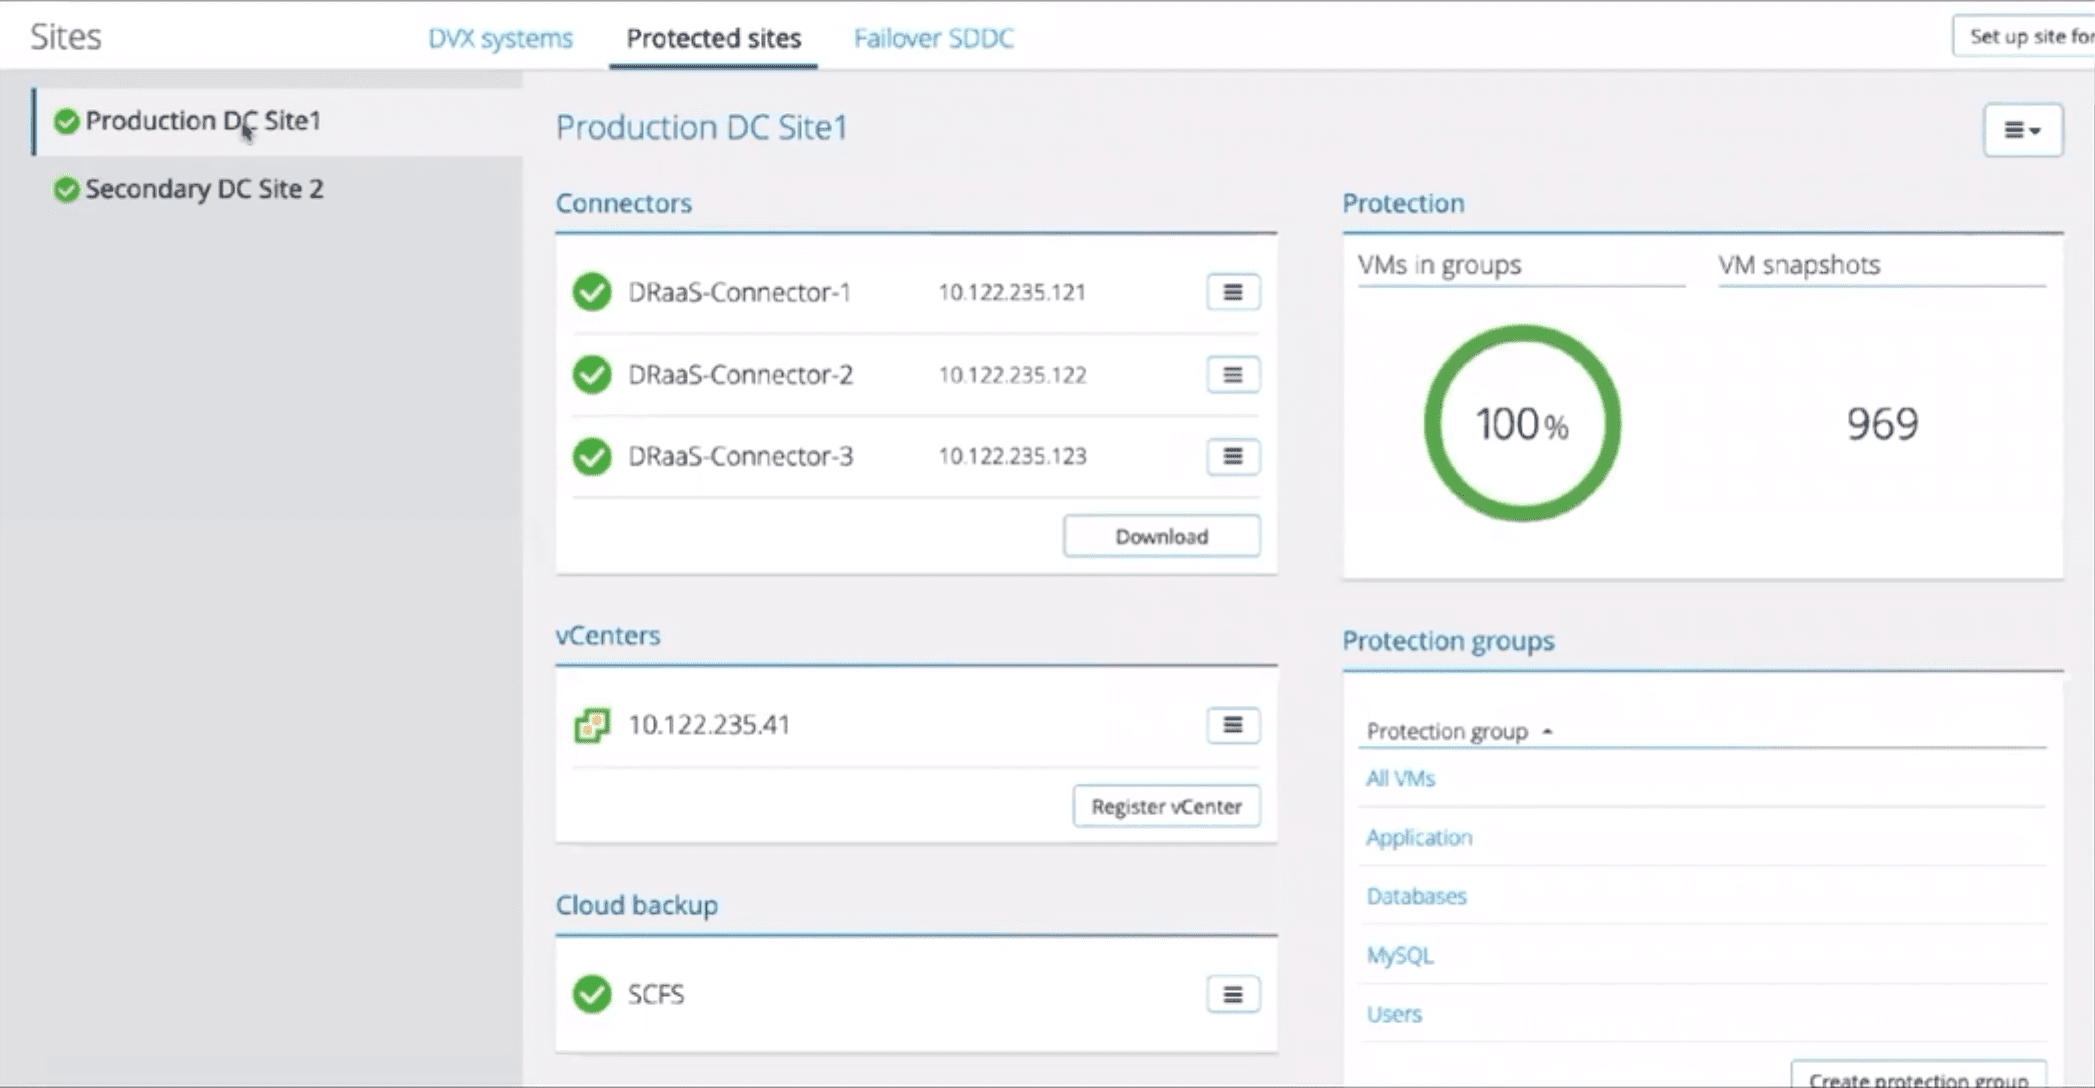 Configuring-protected-sites-with-VMware-Cloud-Disaster-Recovery